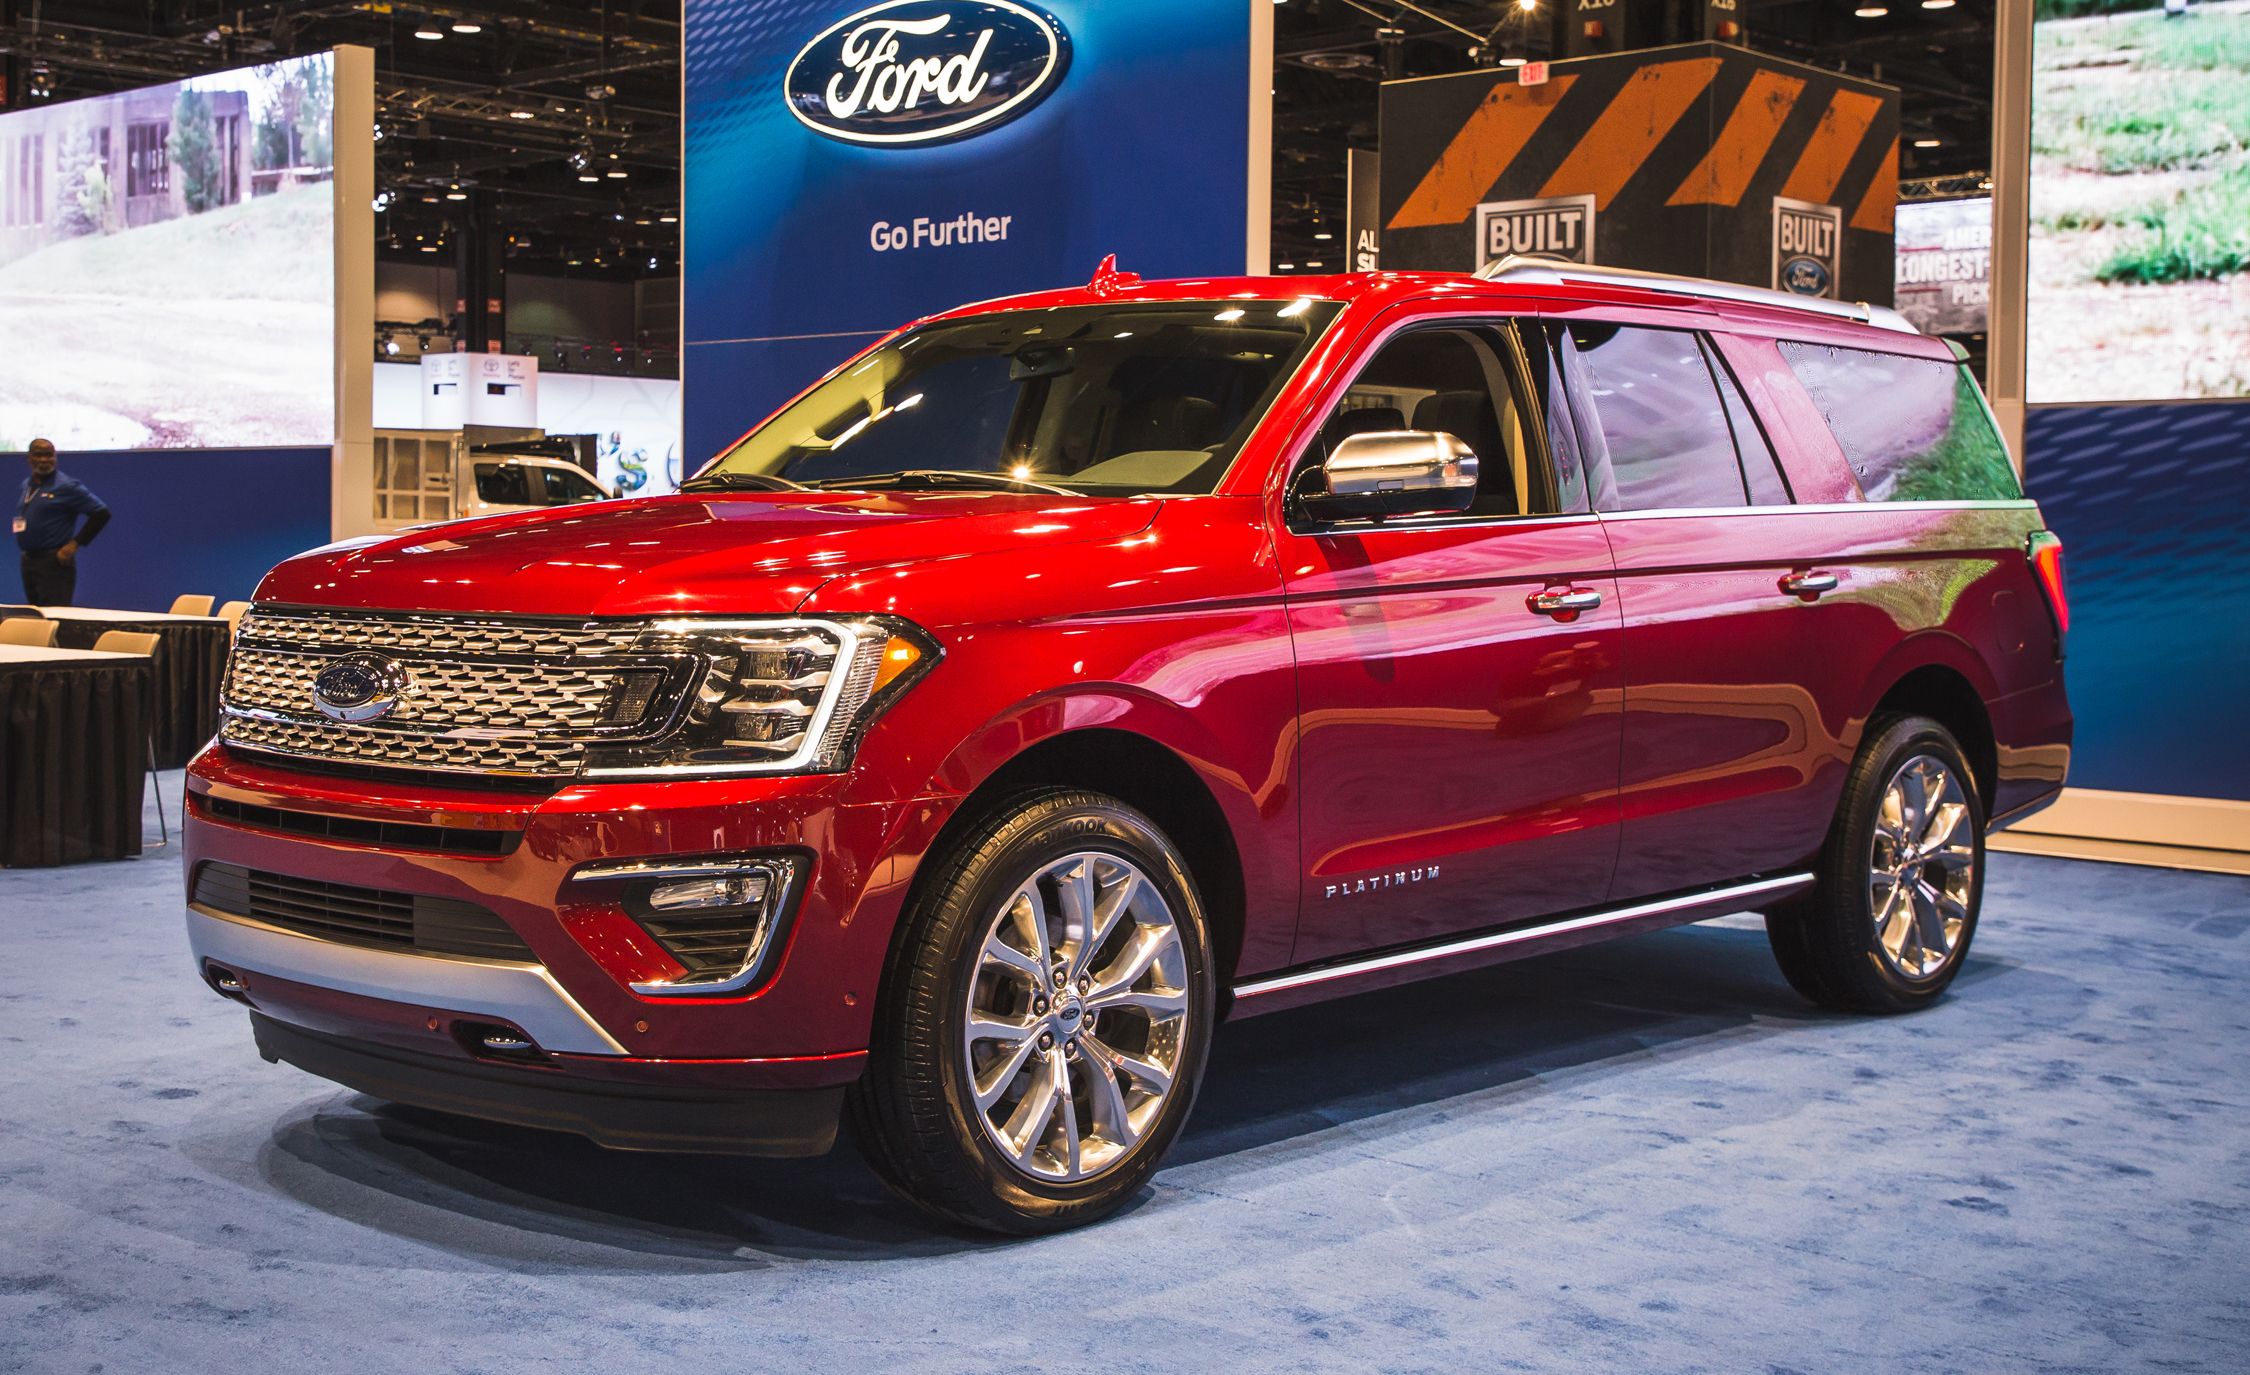 2018 Ford Expedition Photos and Info | News | Car and Driver